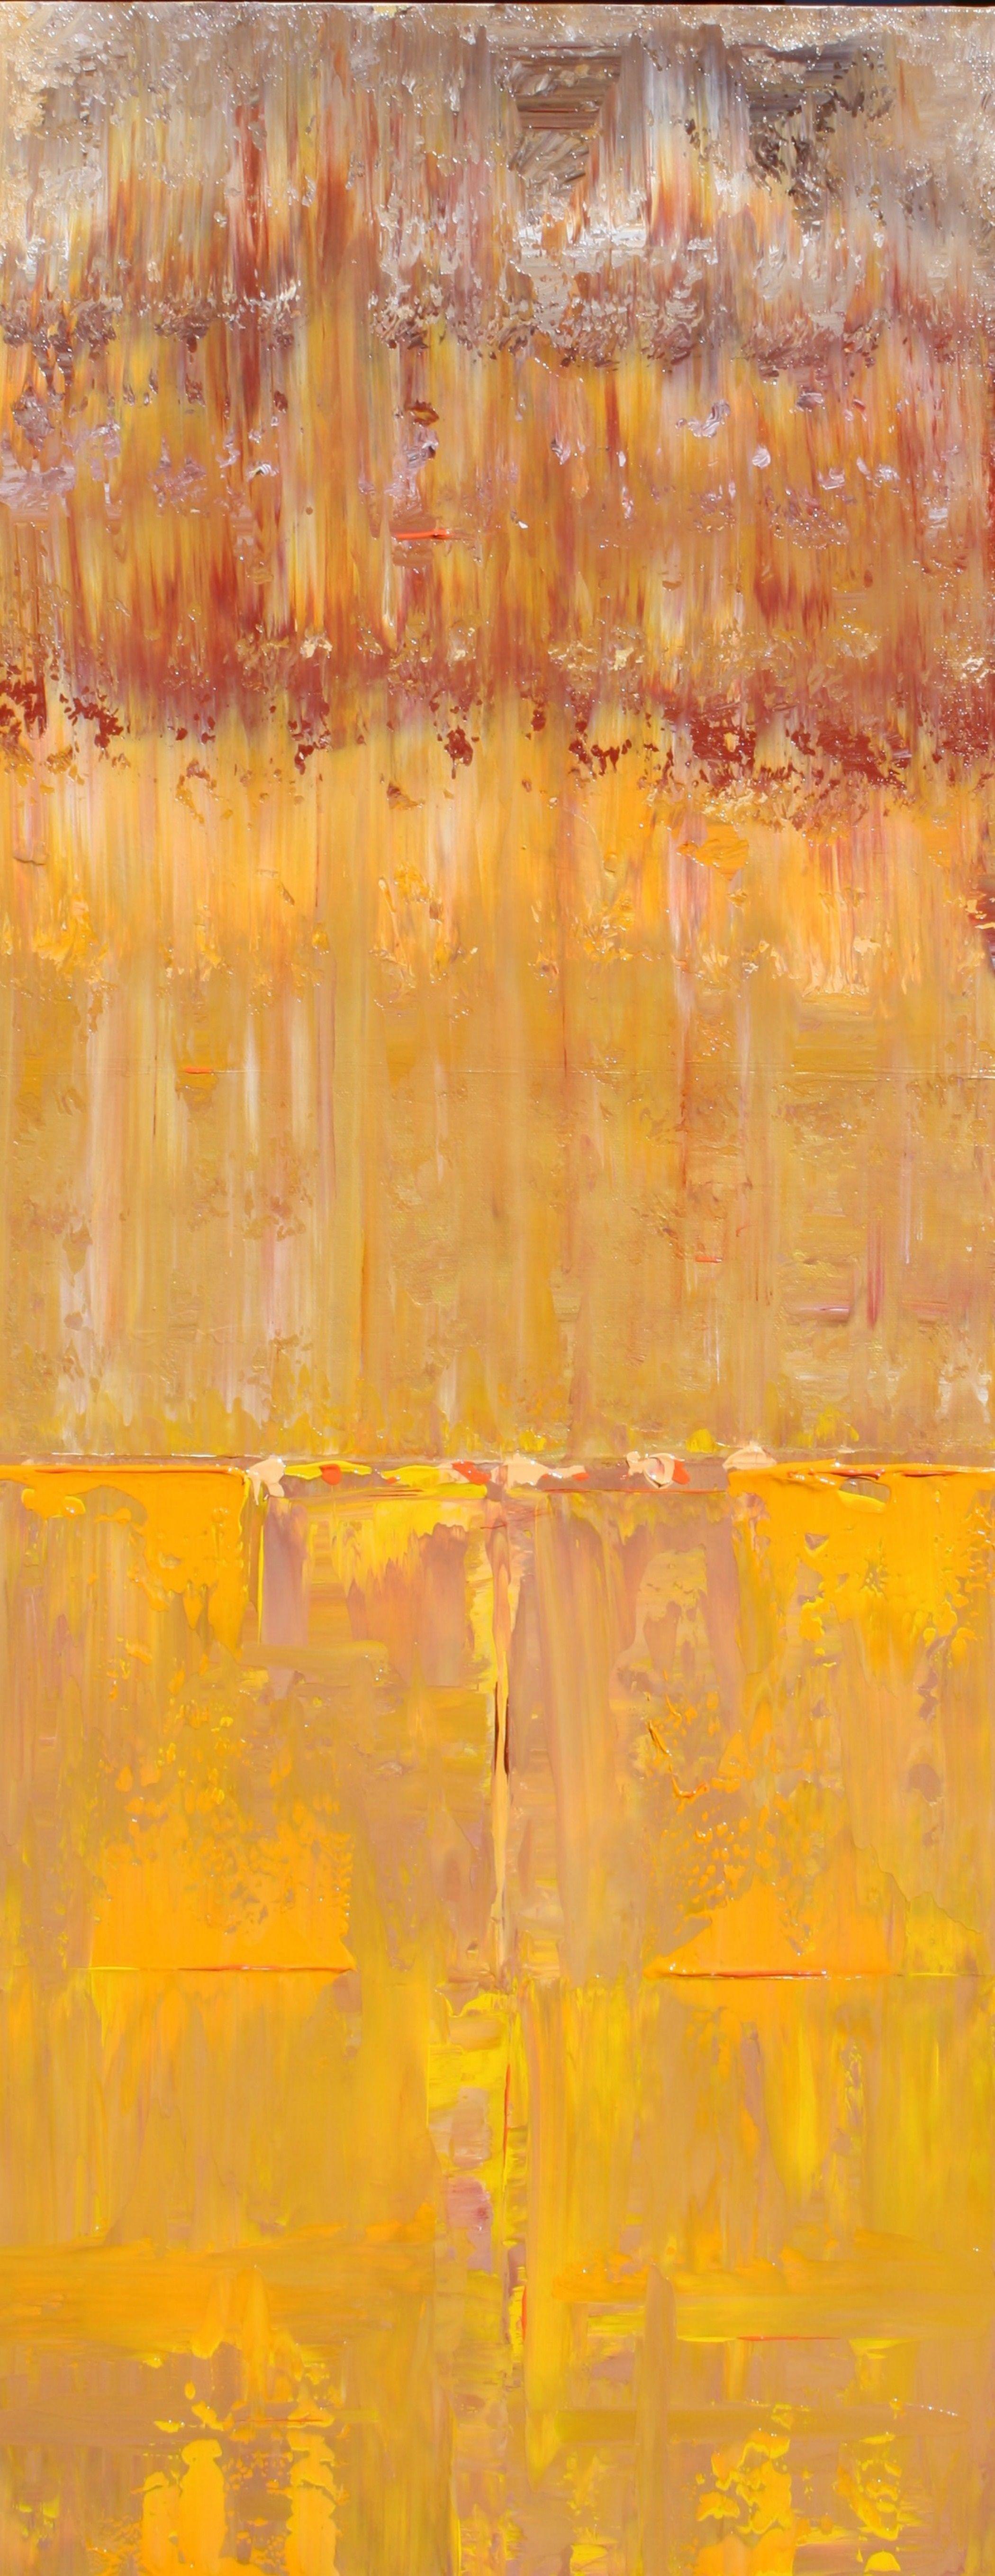 Robert Lynn Abstract Painting - Abstract Autumn Concept, Painting, Acrylic on Canvas